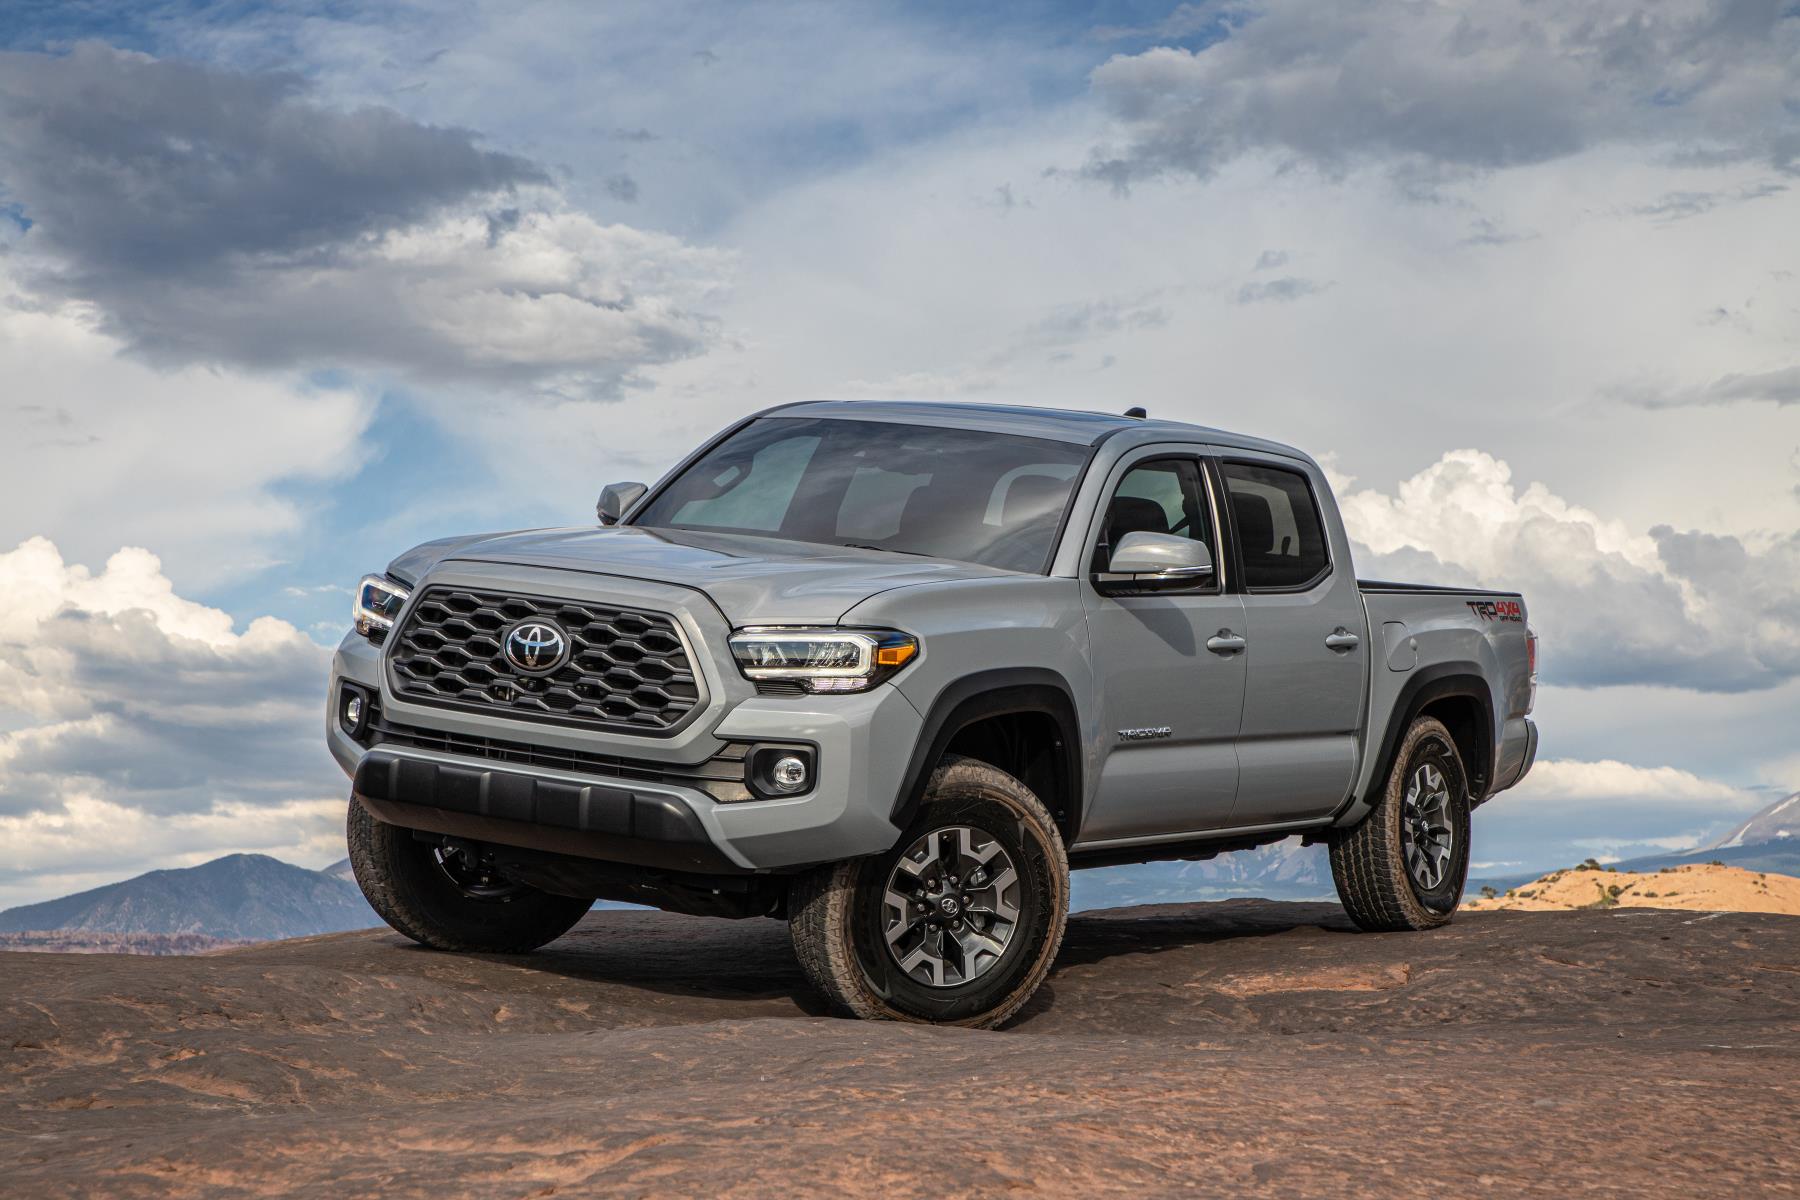 Toyota Tacoma Adds To Mid-Size Truck Leadership